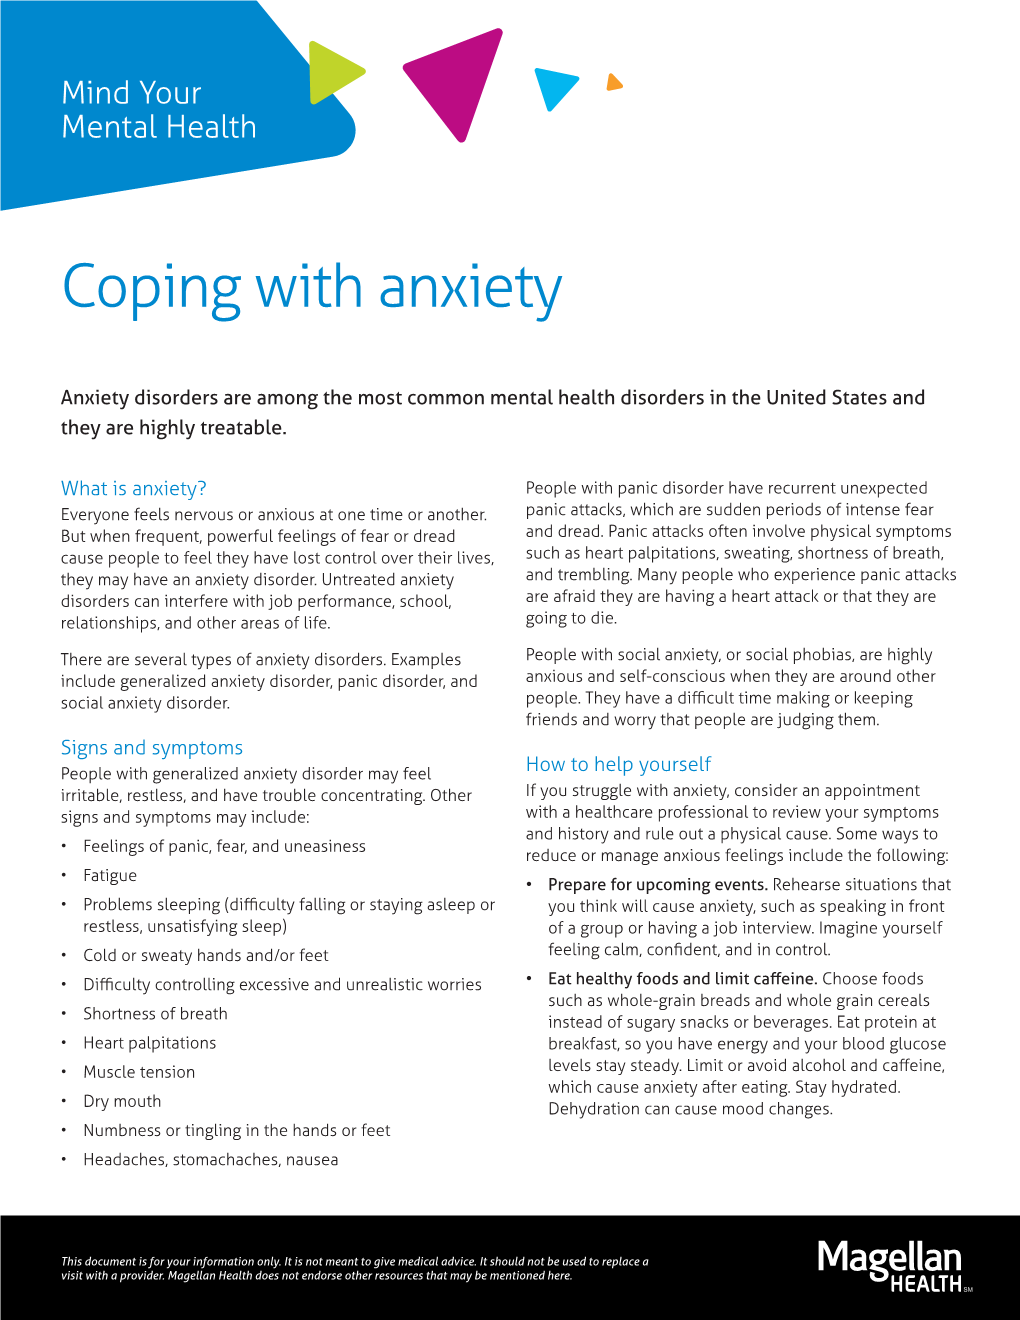 Coping with Anxiety